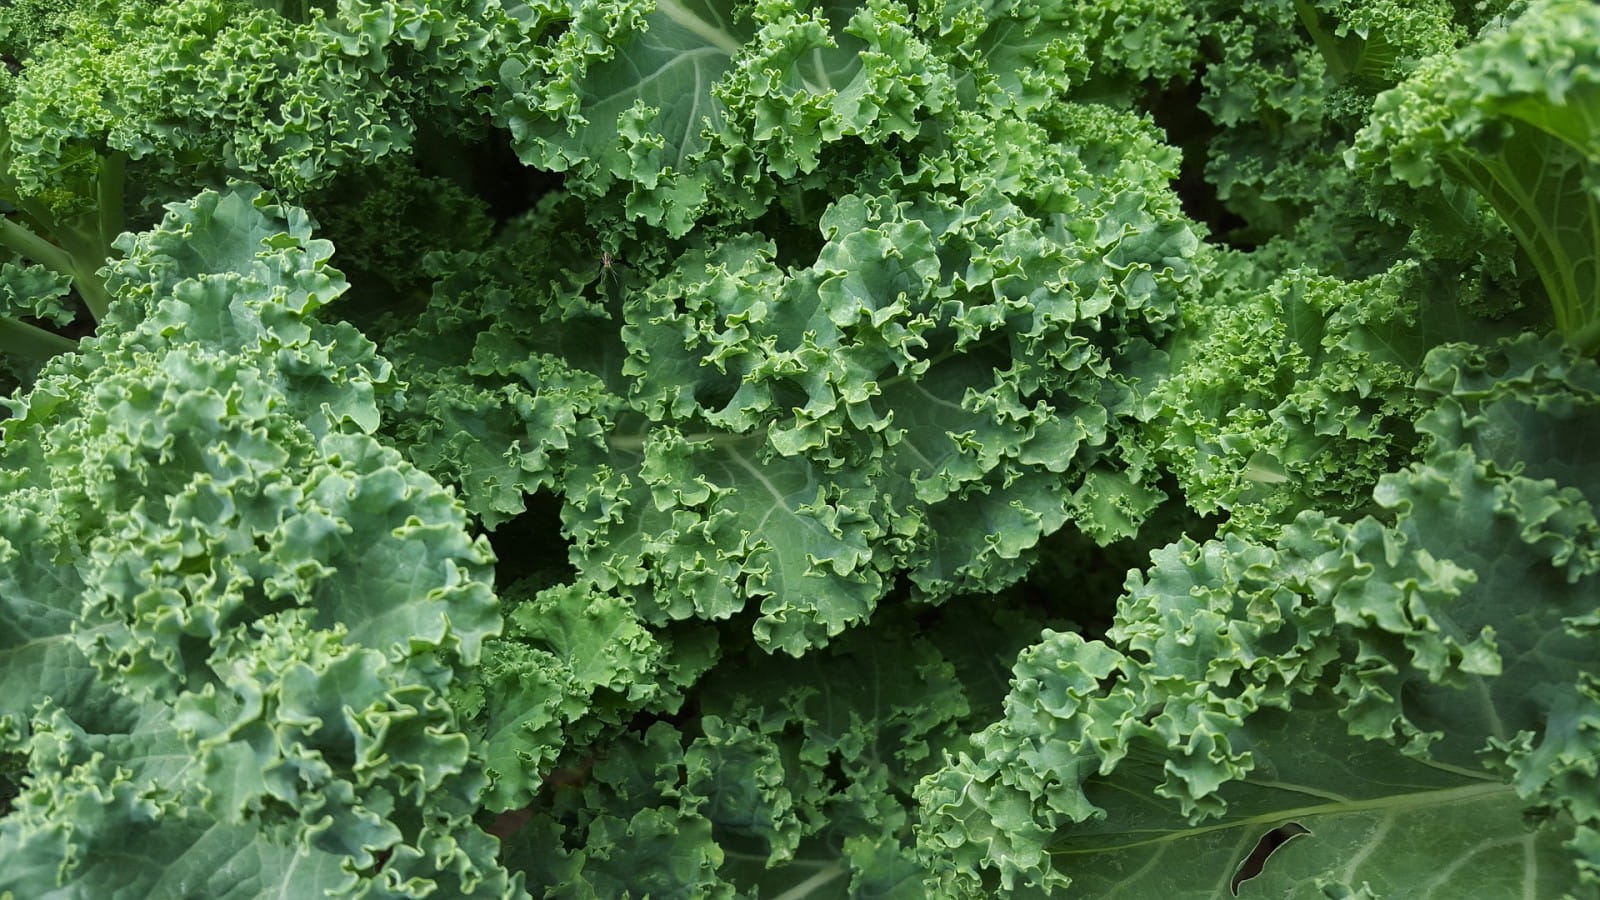 Six of the best drink pairings for kale